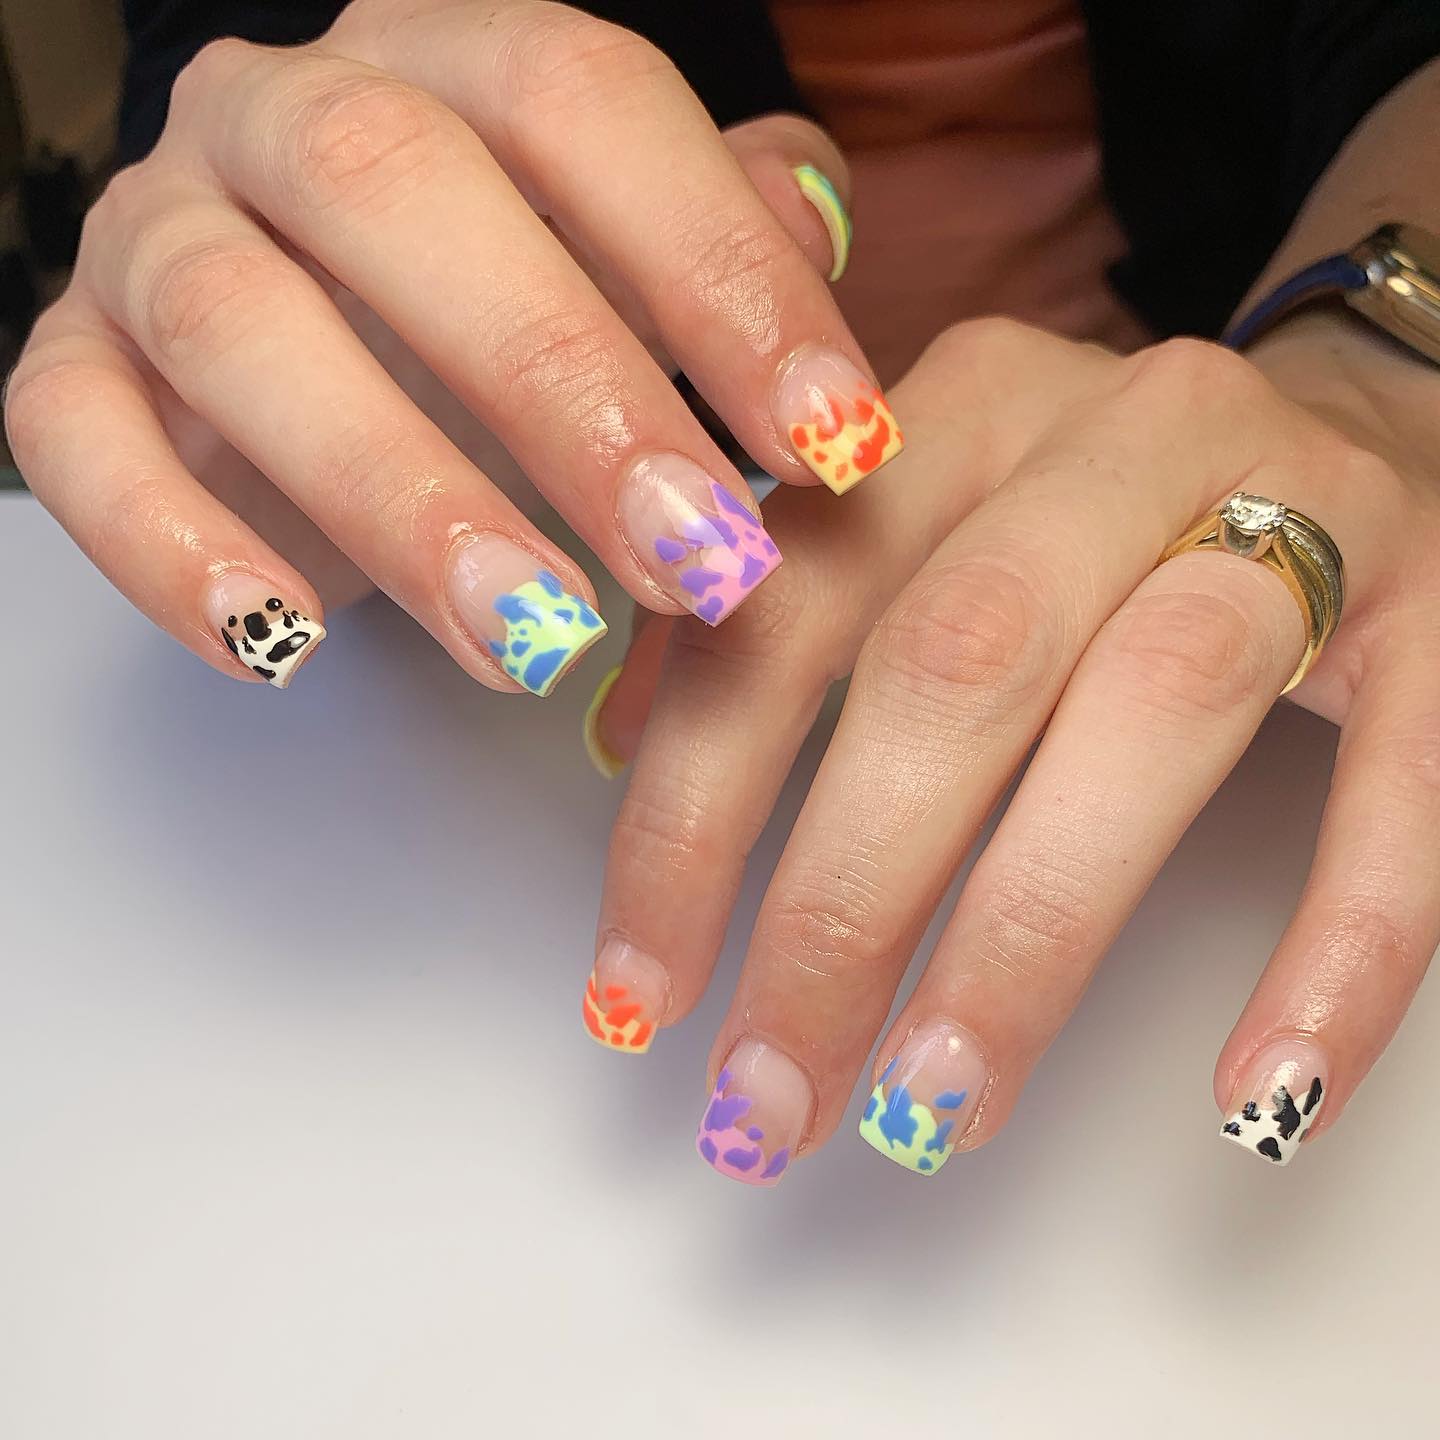 Short Square Nails with Rainbow Cow Print Design